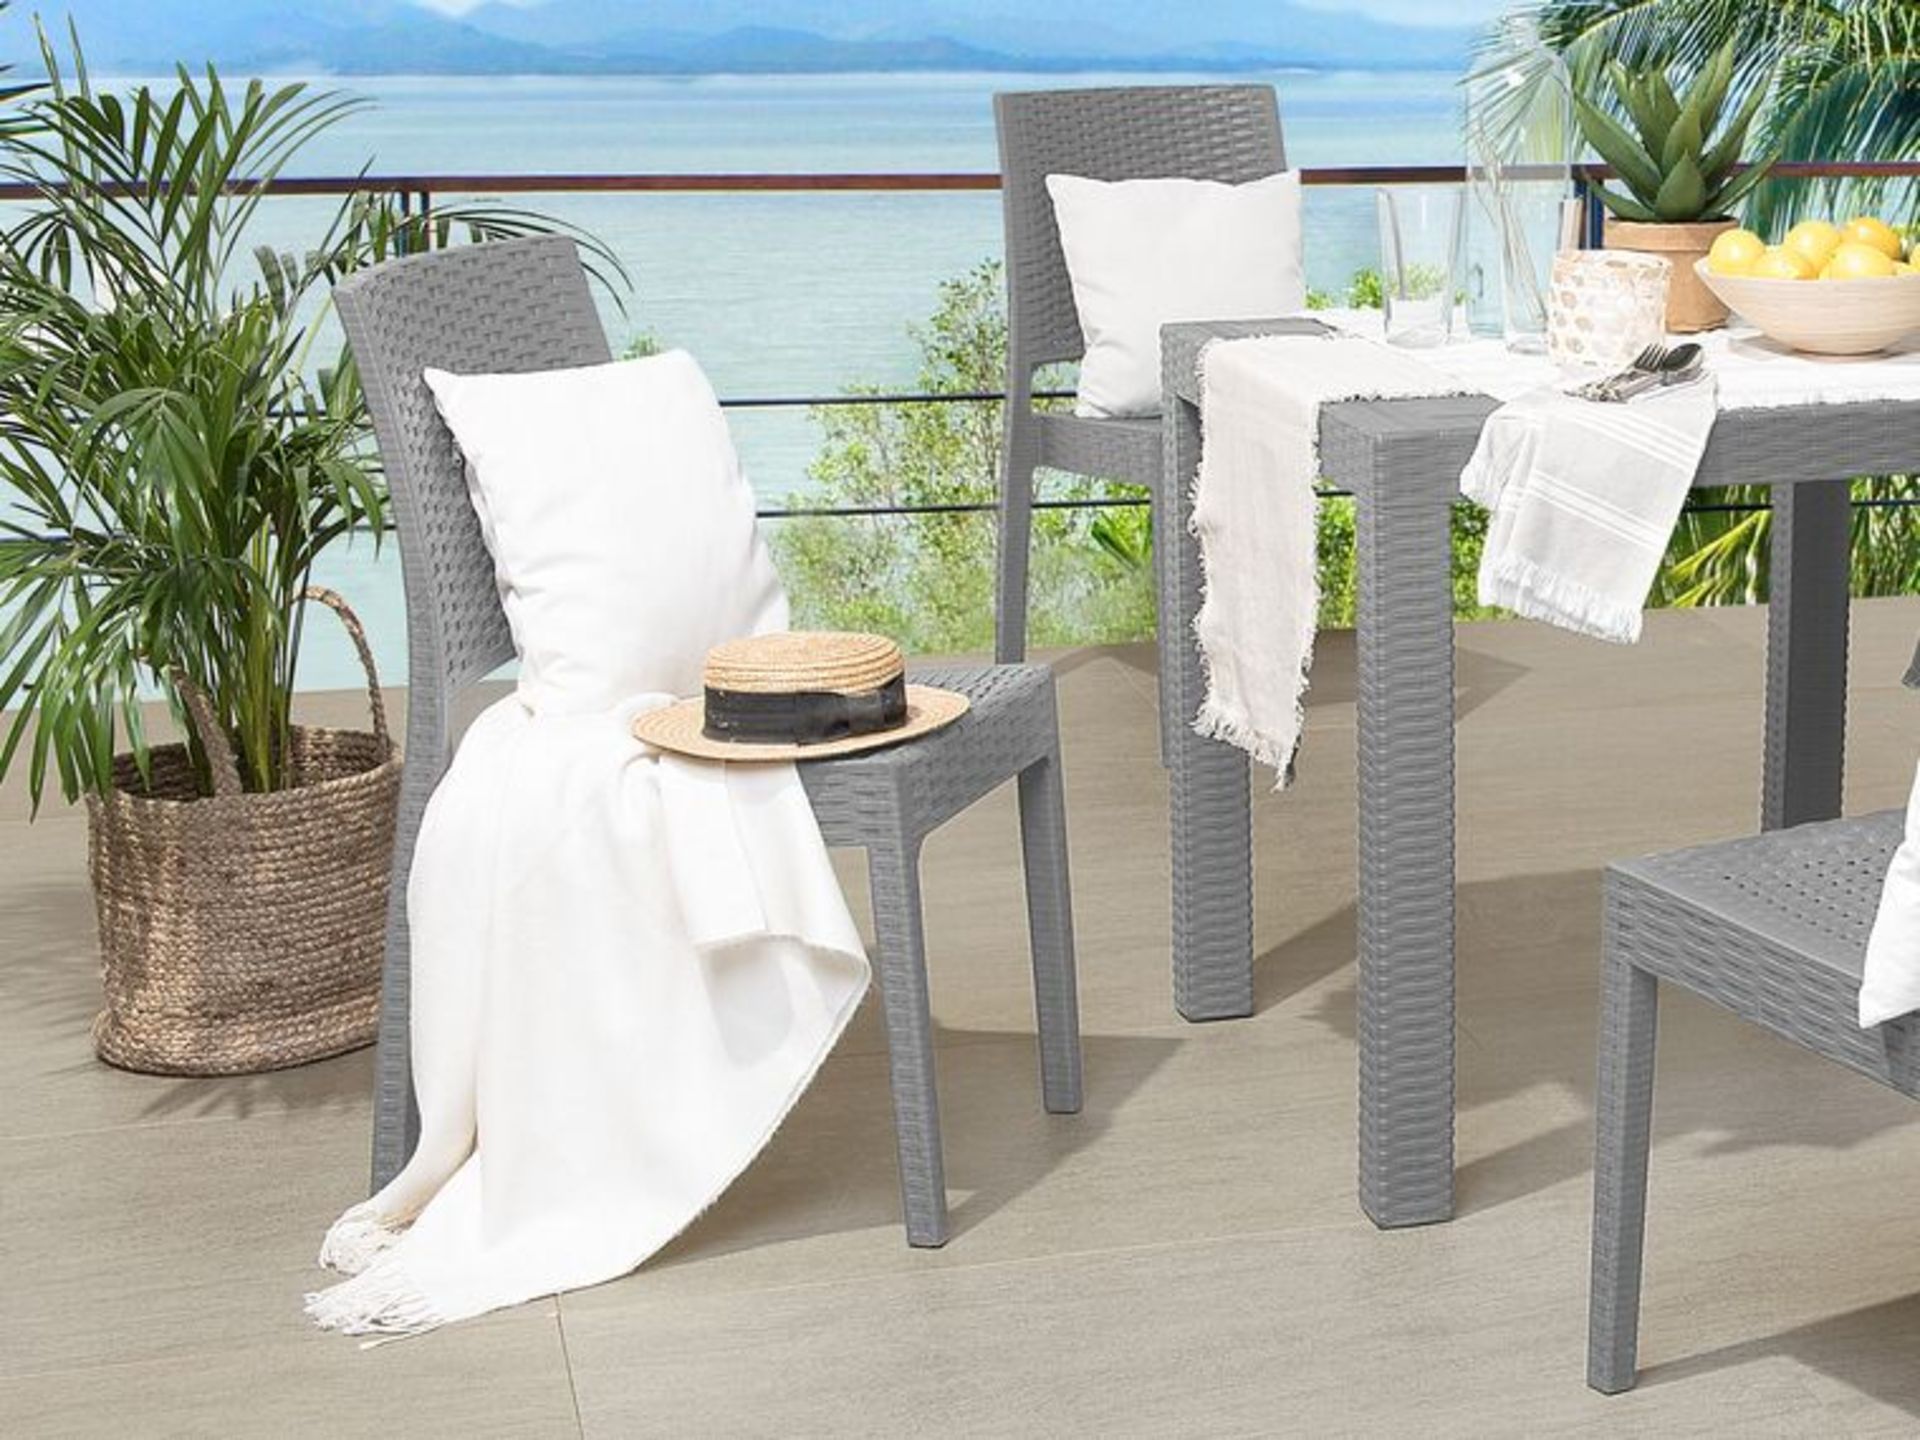 Fossano Set of 4 Garden Dining Chairs Light Grey. - R14.15. RRP £439.99. Enjoy summer afternoons - Image 2 of 2